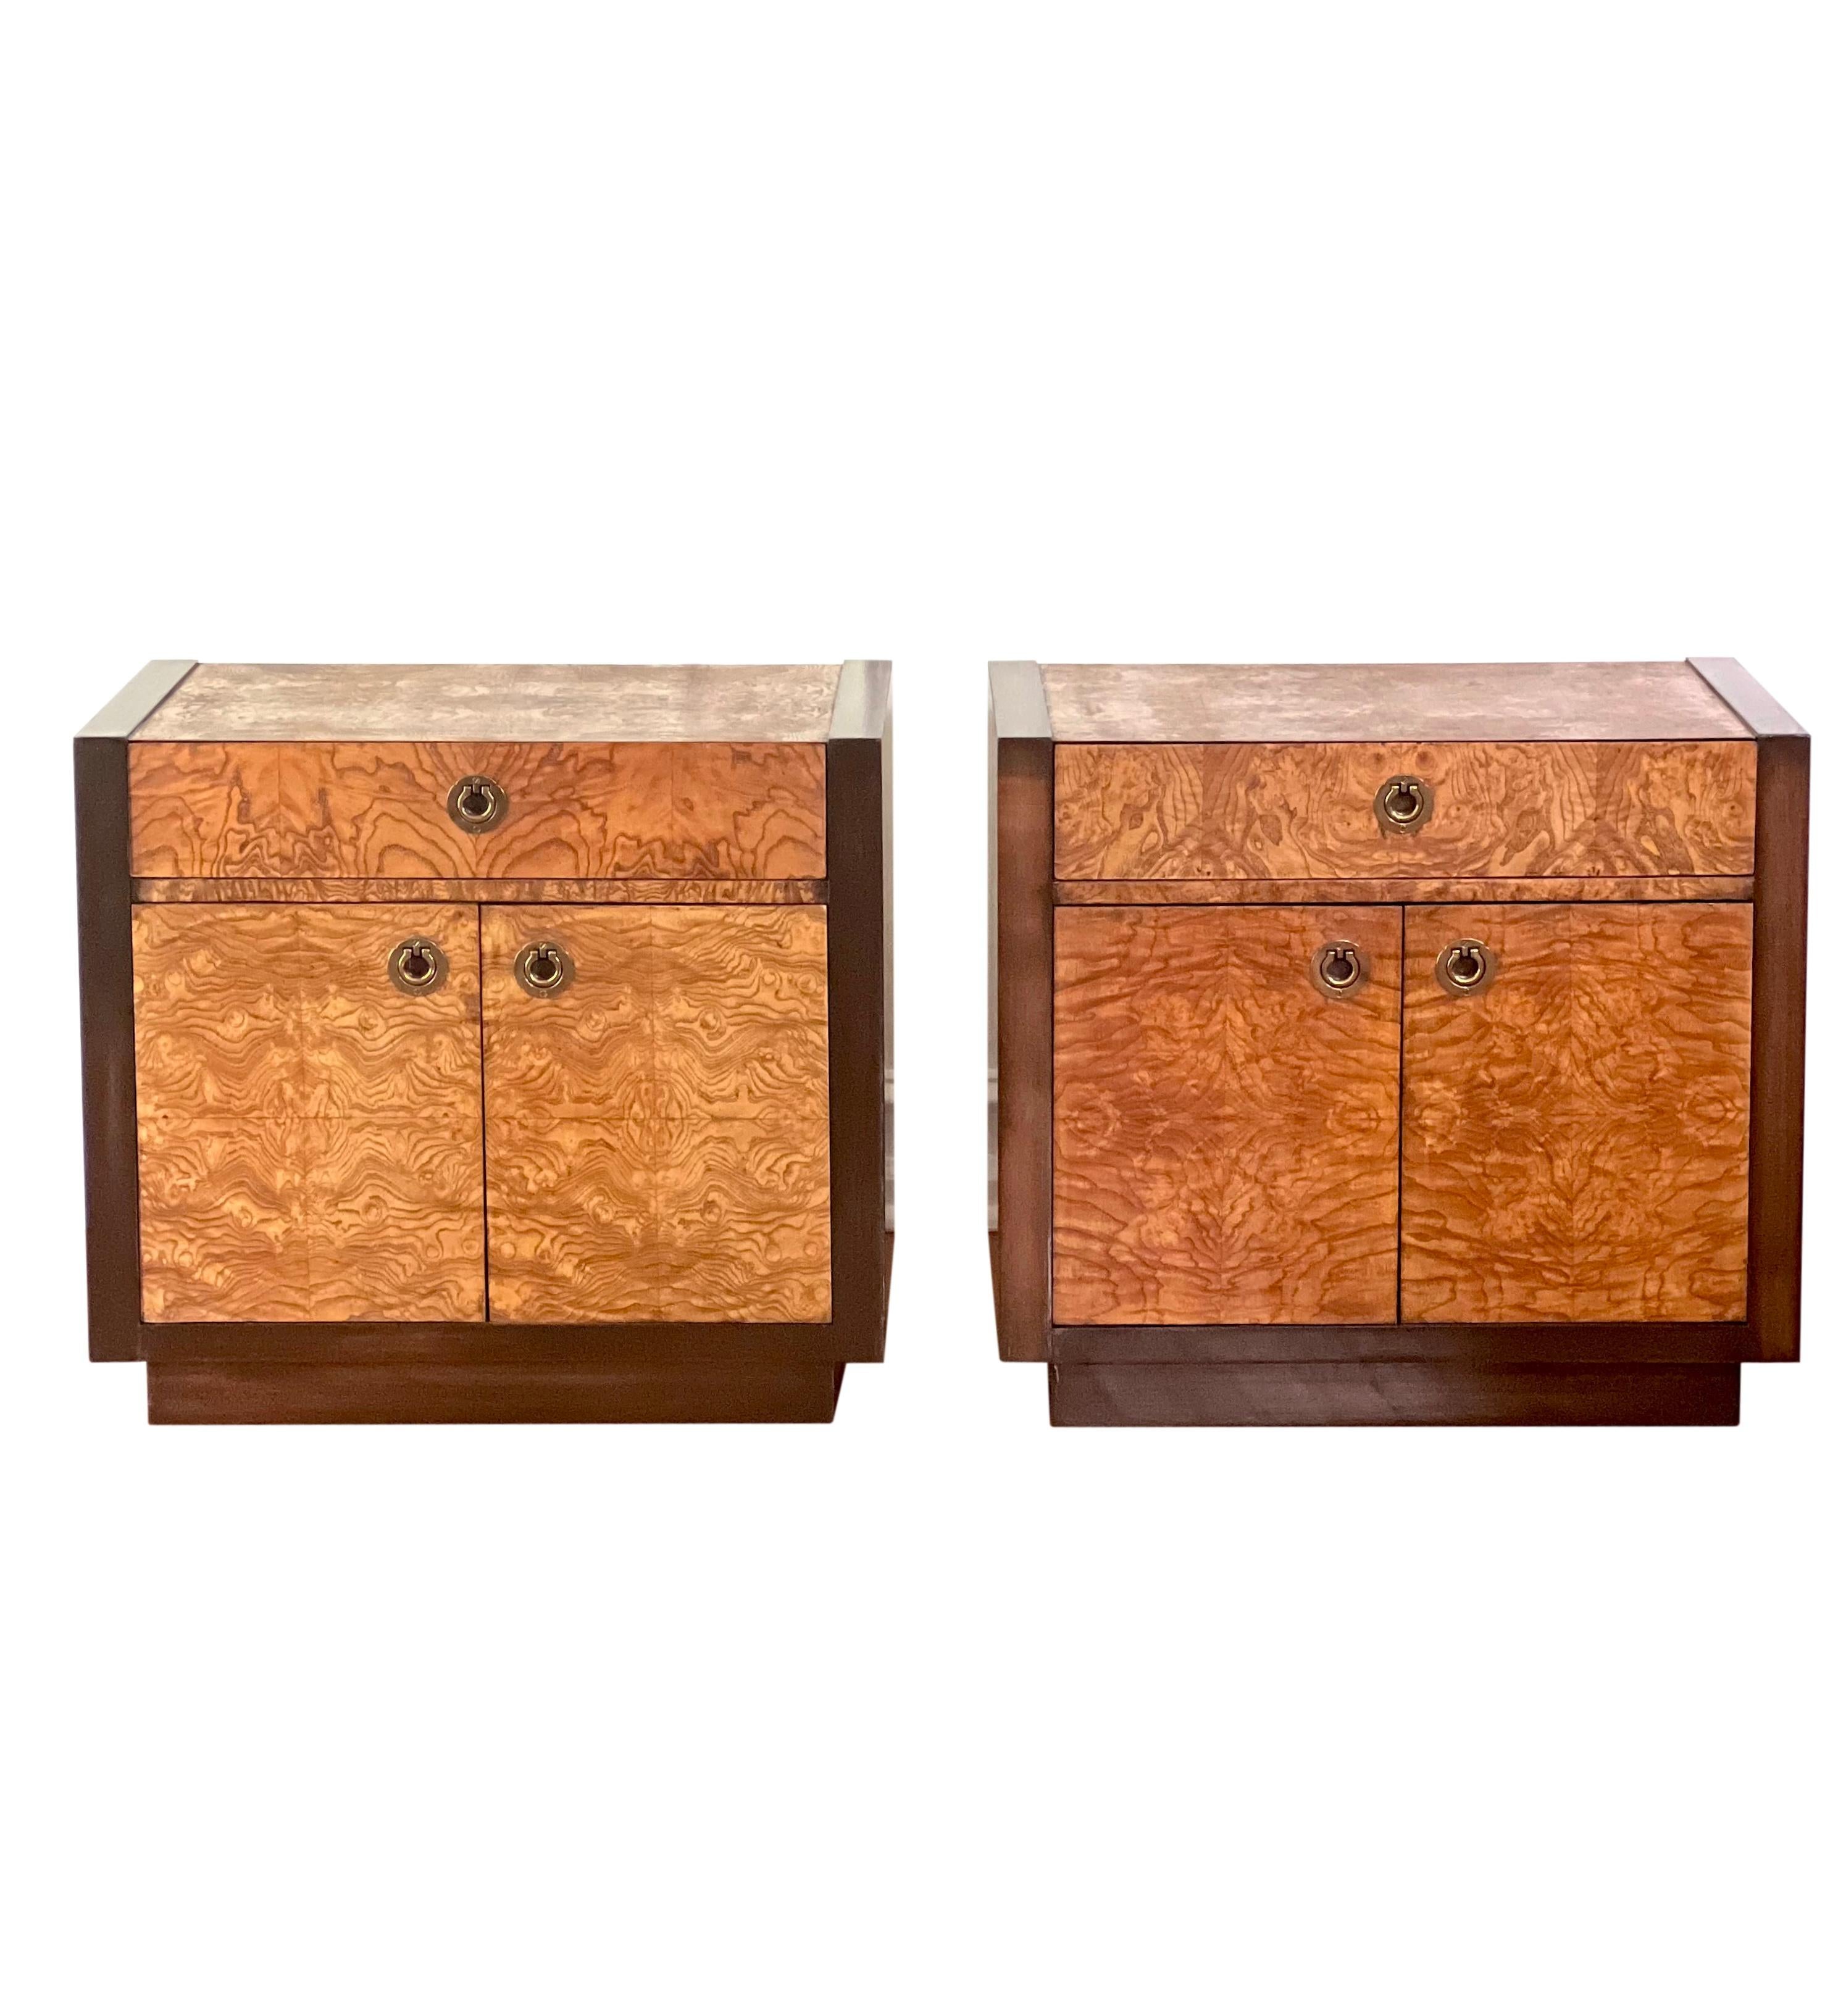 VIntage Milo Baughman style nightstands by Century Furniture.

The stands have rich burl veneer and contrasting dark wood grain which complement one another beautifully. They feature a single dovetail drawer and a spacious cabinet beneath with